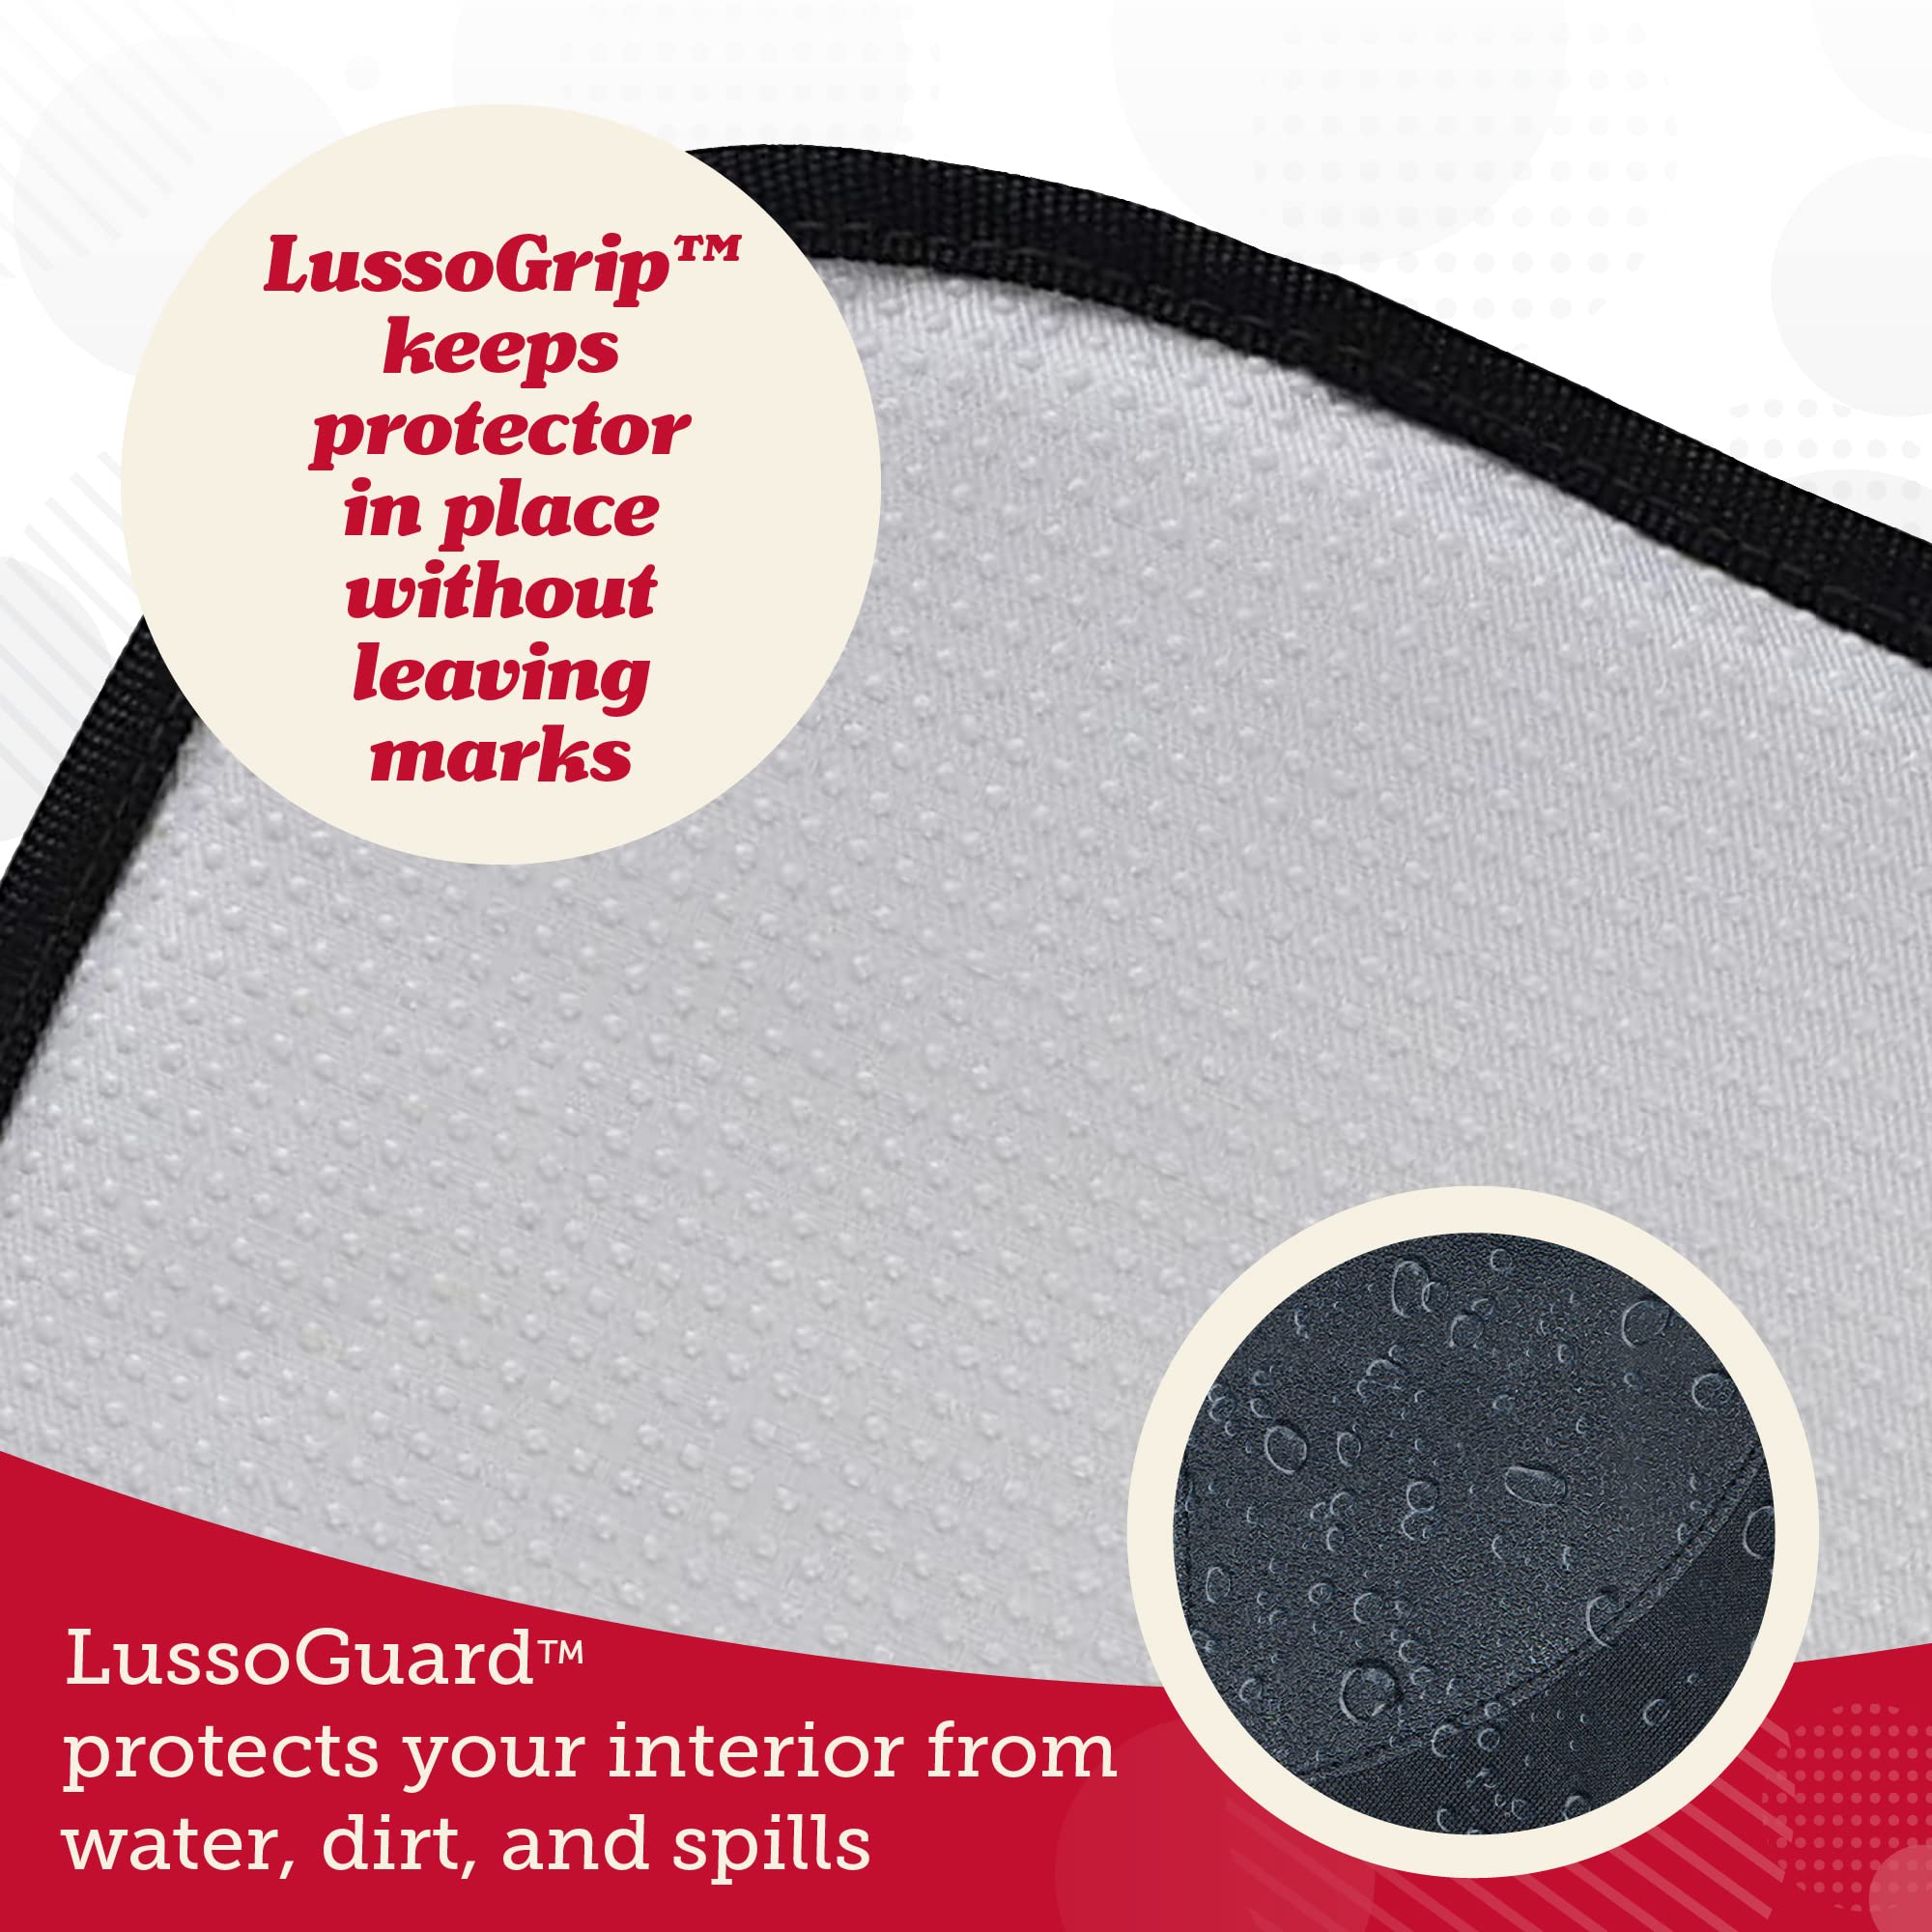 Lusso Gear Car Seat Protector Value Twin Pack, Thick Padding, 2 Mesh Storage Pockets, Waterproof, Protects Fabric or Leather Seats from Child Car Seat and Pets, Non-Slip Rubber Padded Backing